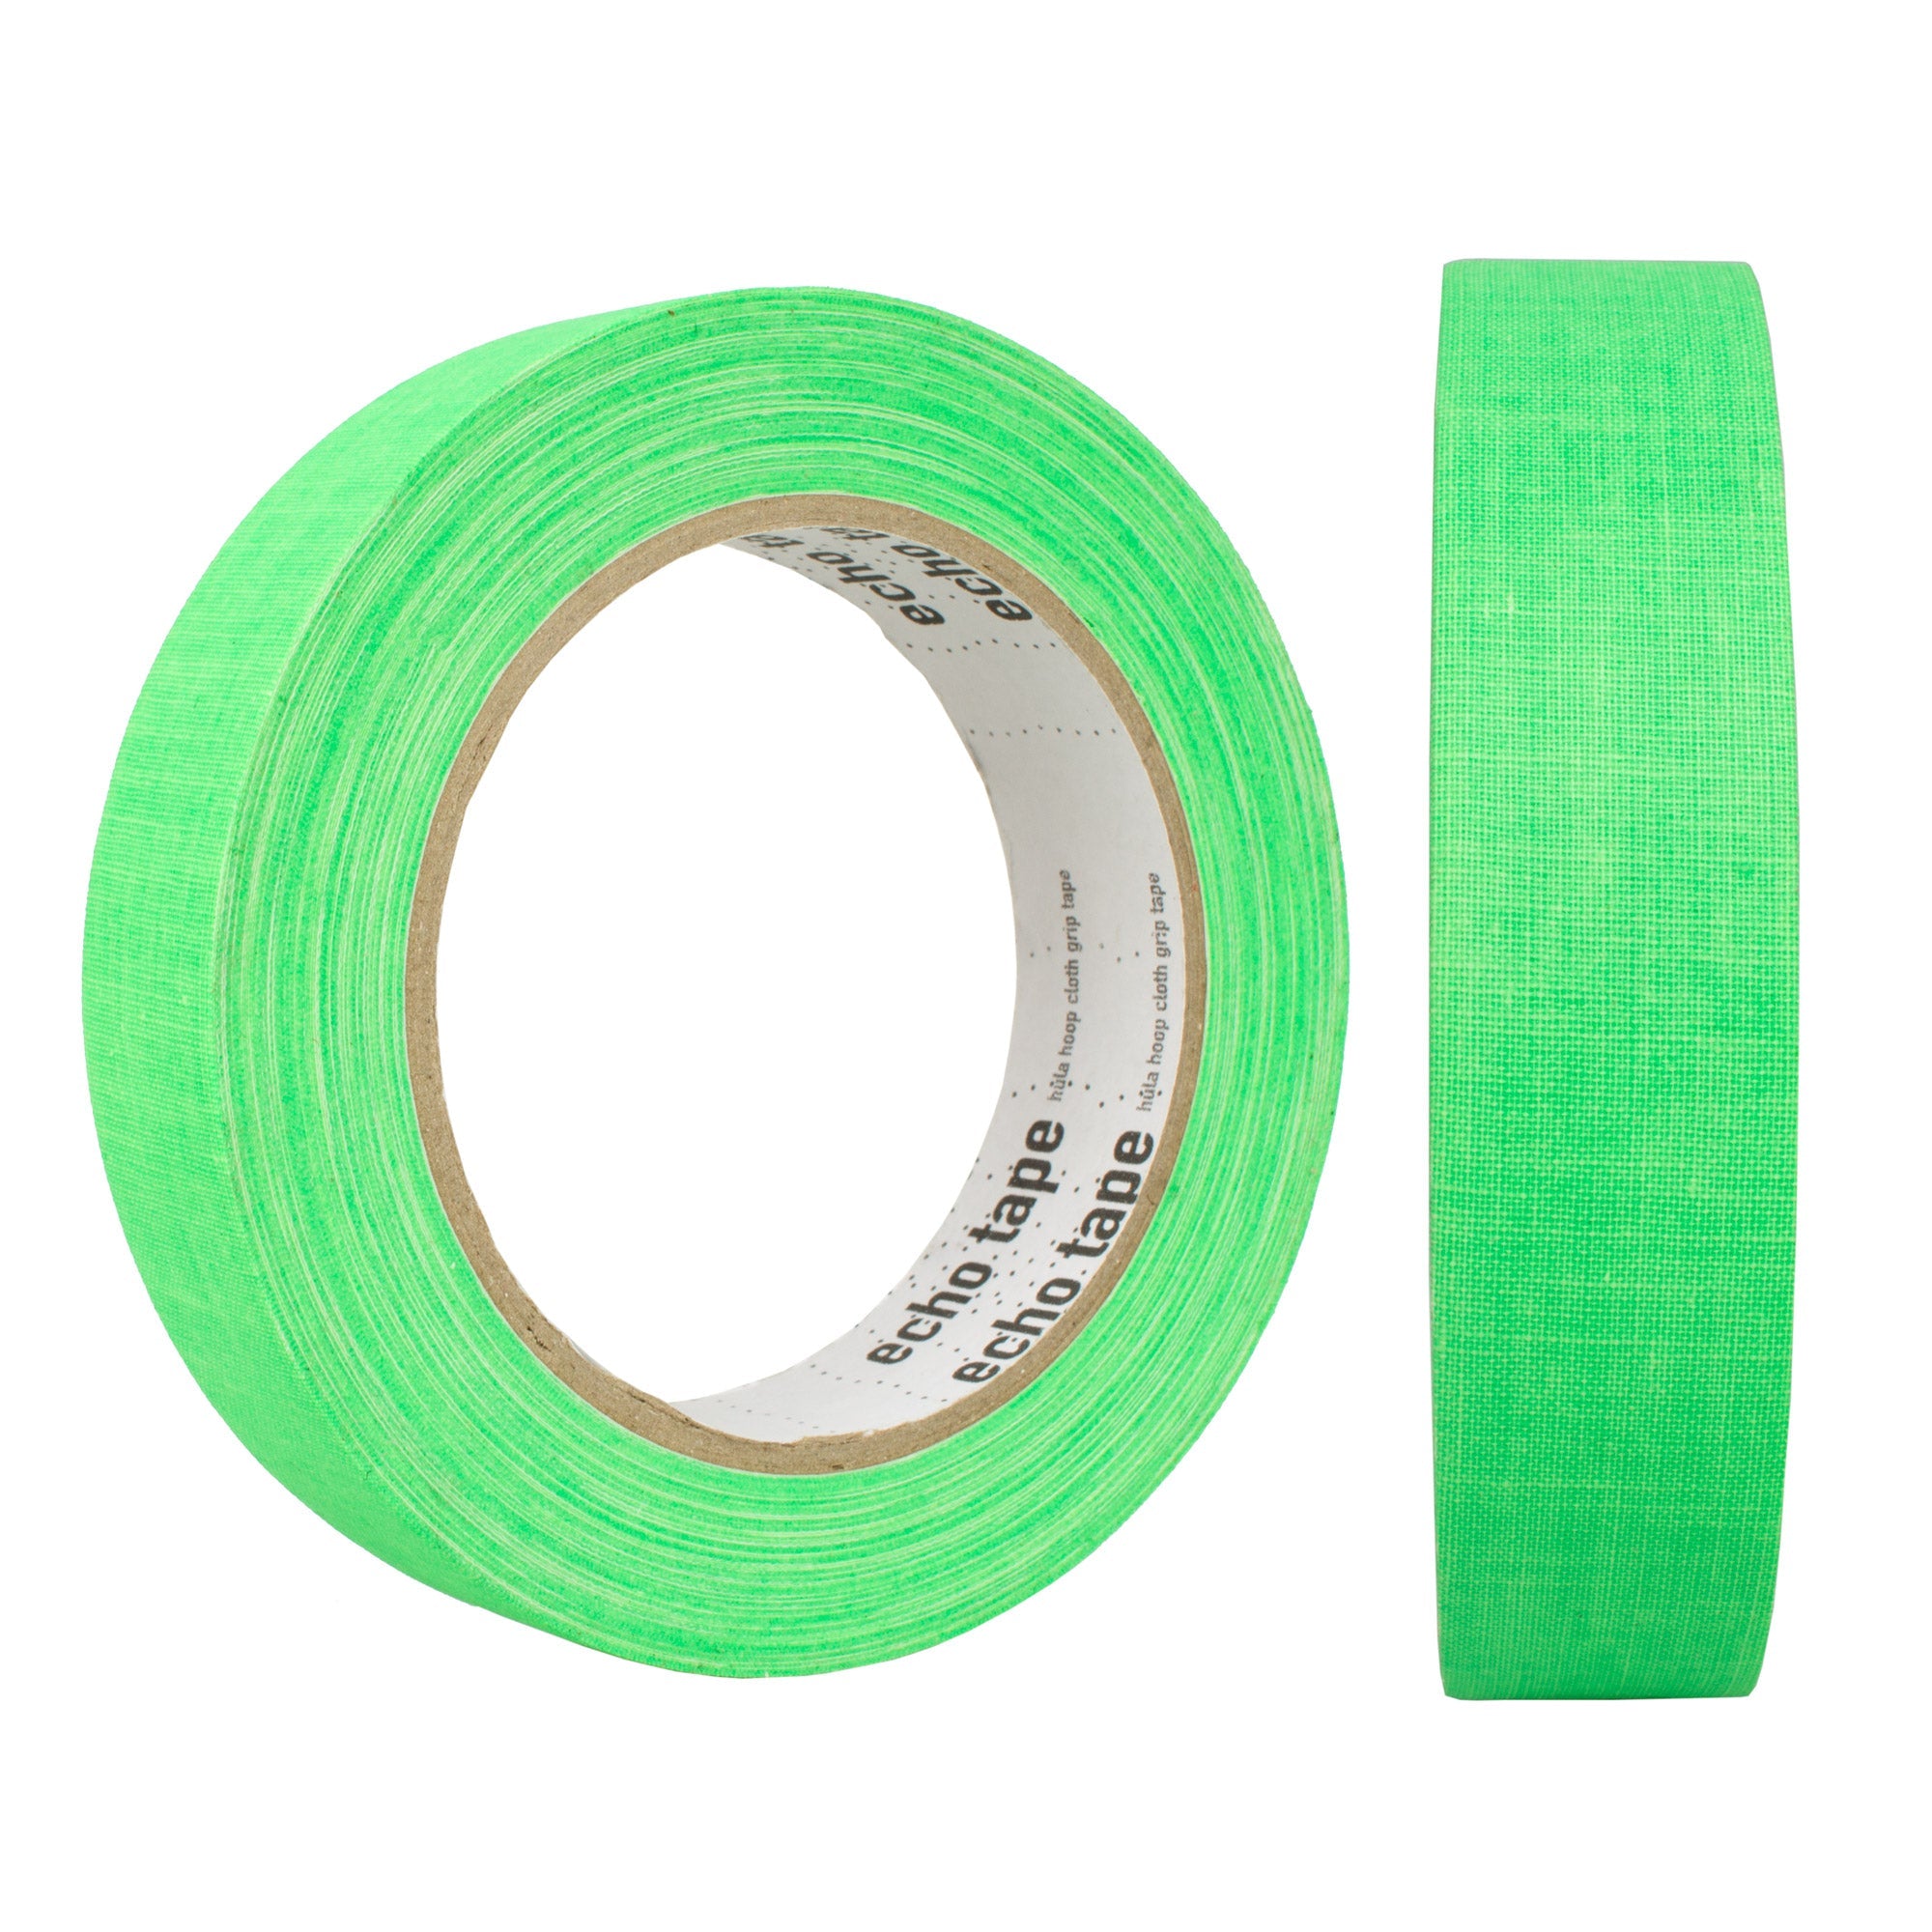 a roll of UV green tape from two angles